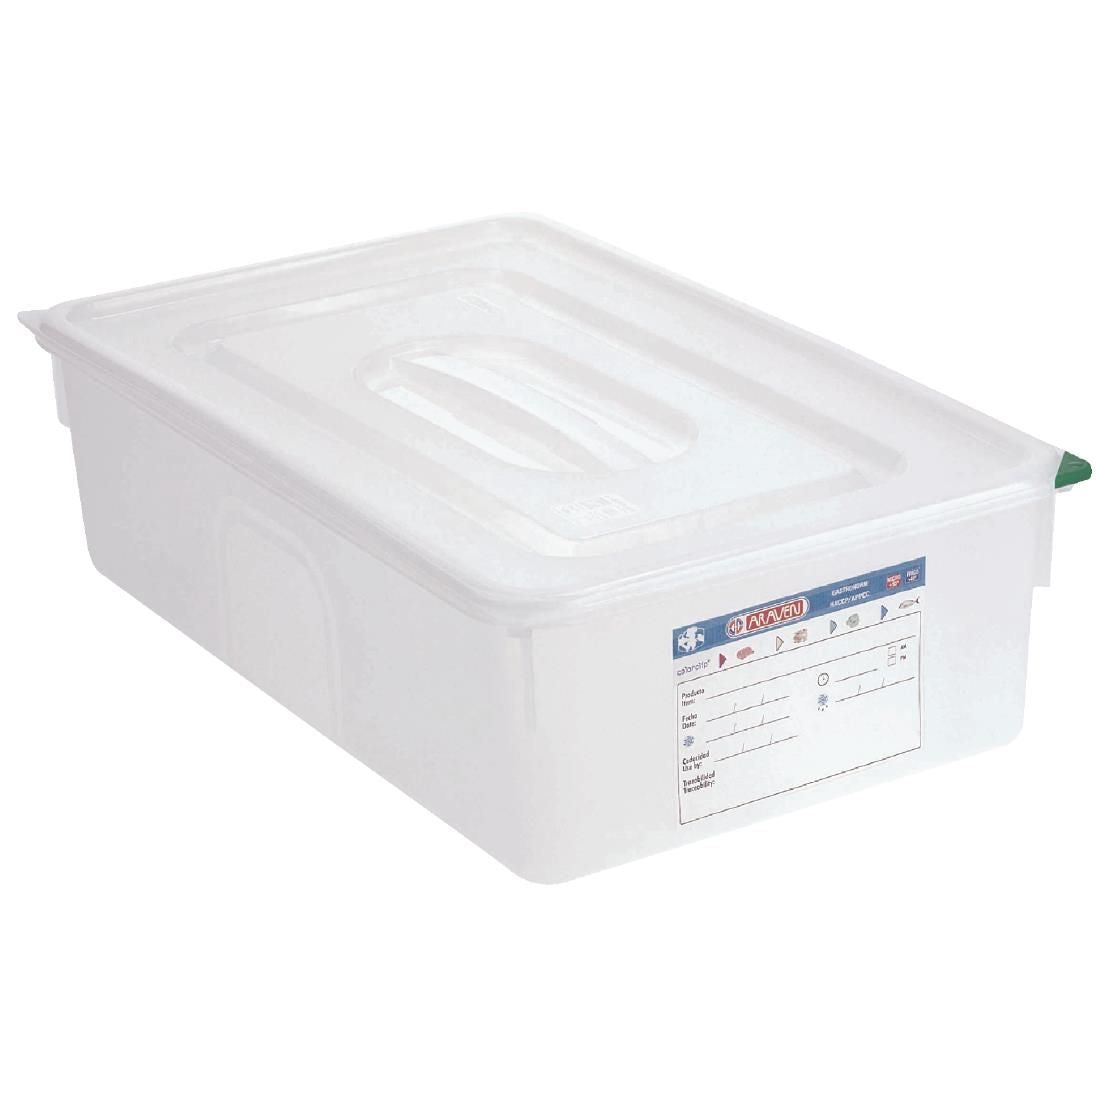 Araven Polypropylene 1/1 Gastronorm Food Storage Box 21Ltr (Pack of 4) JD Catering Equipment Solutions Ltd